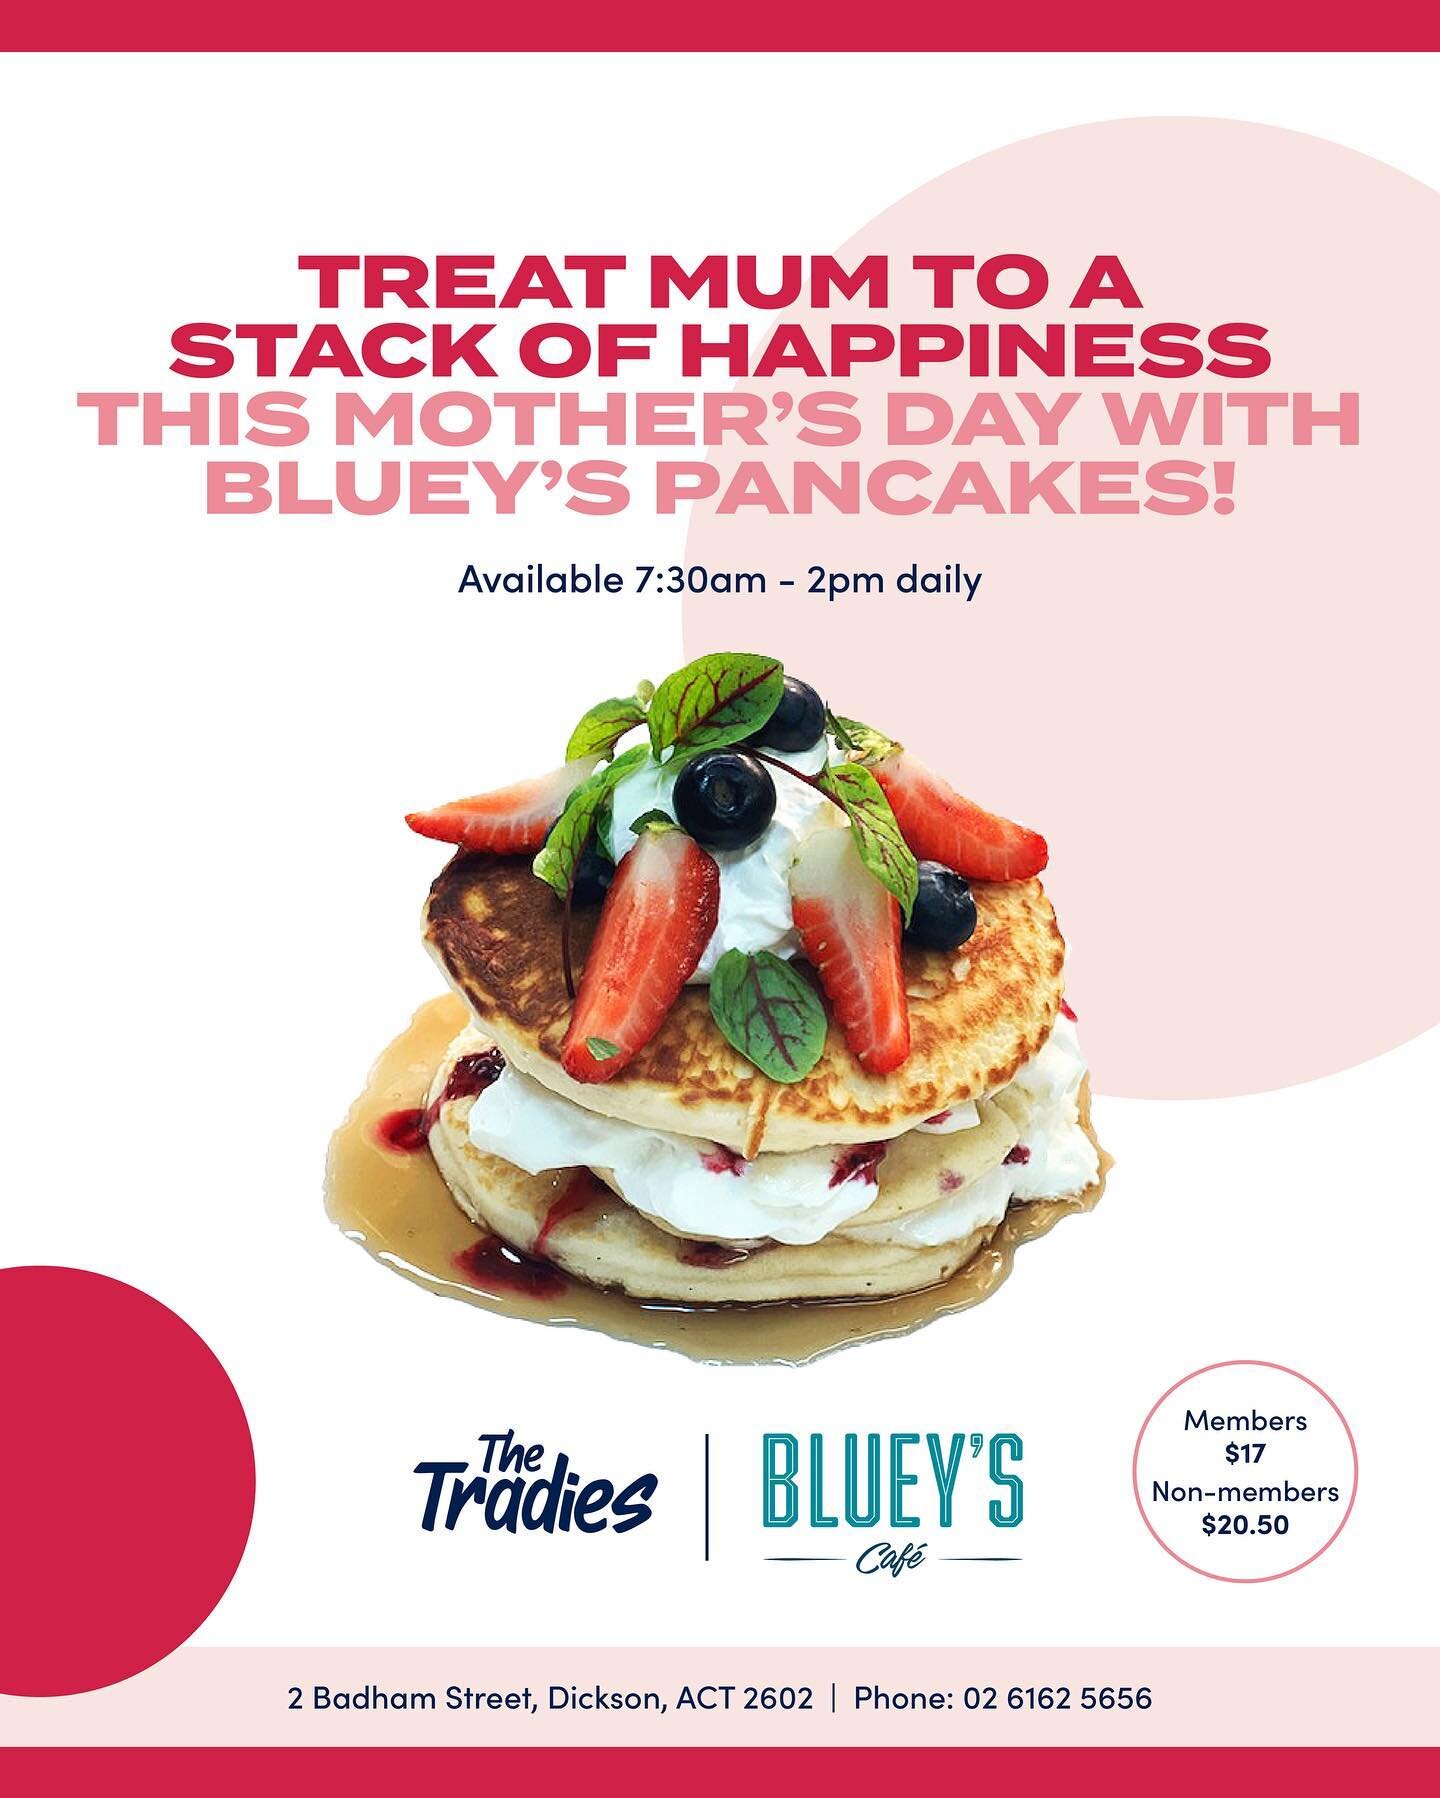 Make Mum's day extra special this 𝗠𝗼𝘁𝗵𝗲𝗿'𝘀 𝗗𝗮𝘆 with a stack of happiness from Bluey's 😊

Our fluffy, delicious pancakes are 𝗺𝗮𝗱𝗲 𝘄𝗶𝘁𝗵 𝗹𝗼𝘃𝗲 𝗮𝗻𝗱 𝘀𝗲𝗿𝘃𝗲𝗱 𝘄𝗶𝘁𝗵 𝗷𝗼𝘆, so you can treat your mum to a breakfast she won't 